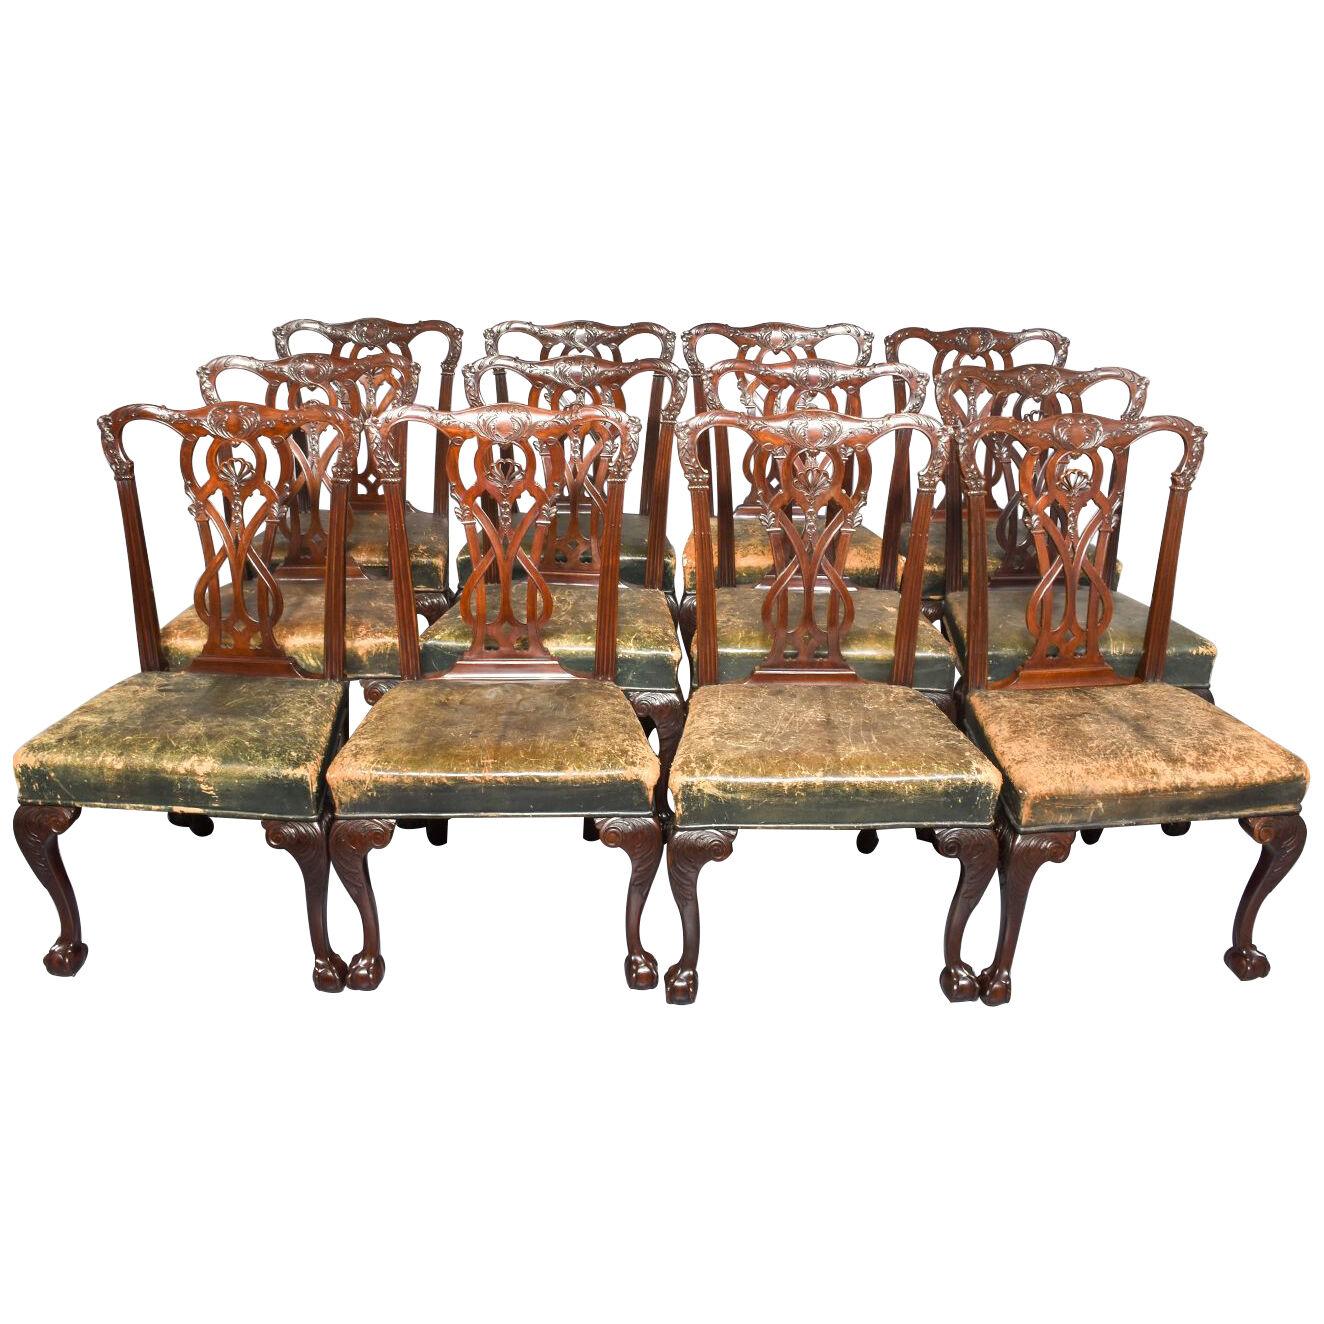 Rare set of 12 Mahogany Chippendale chairs by Marsh, Jones and Cribb 